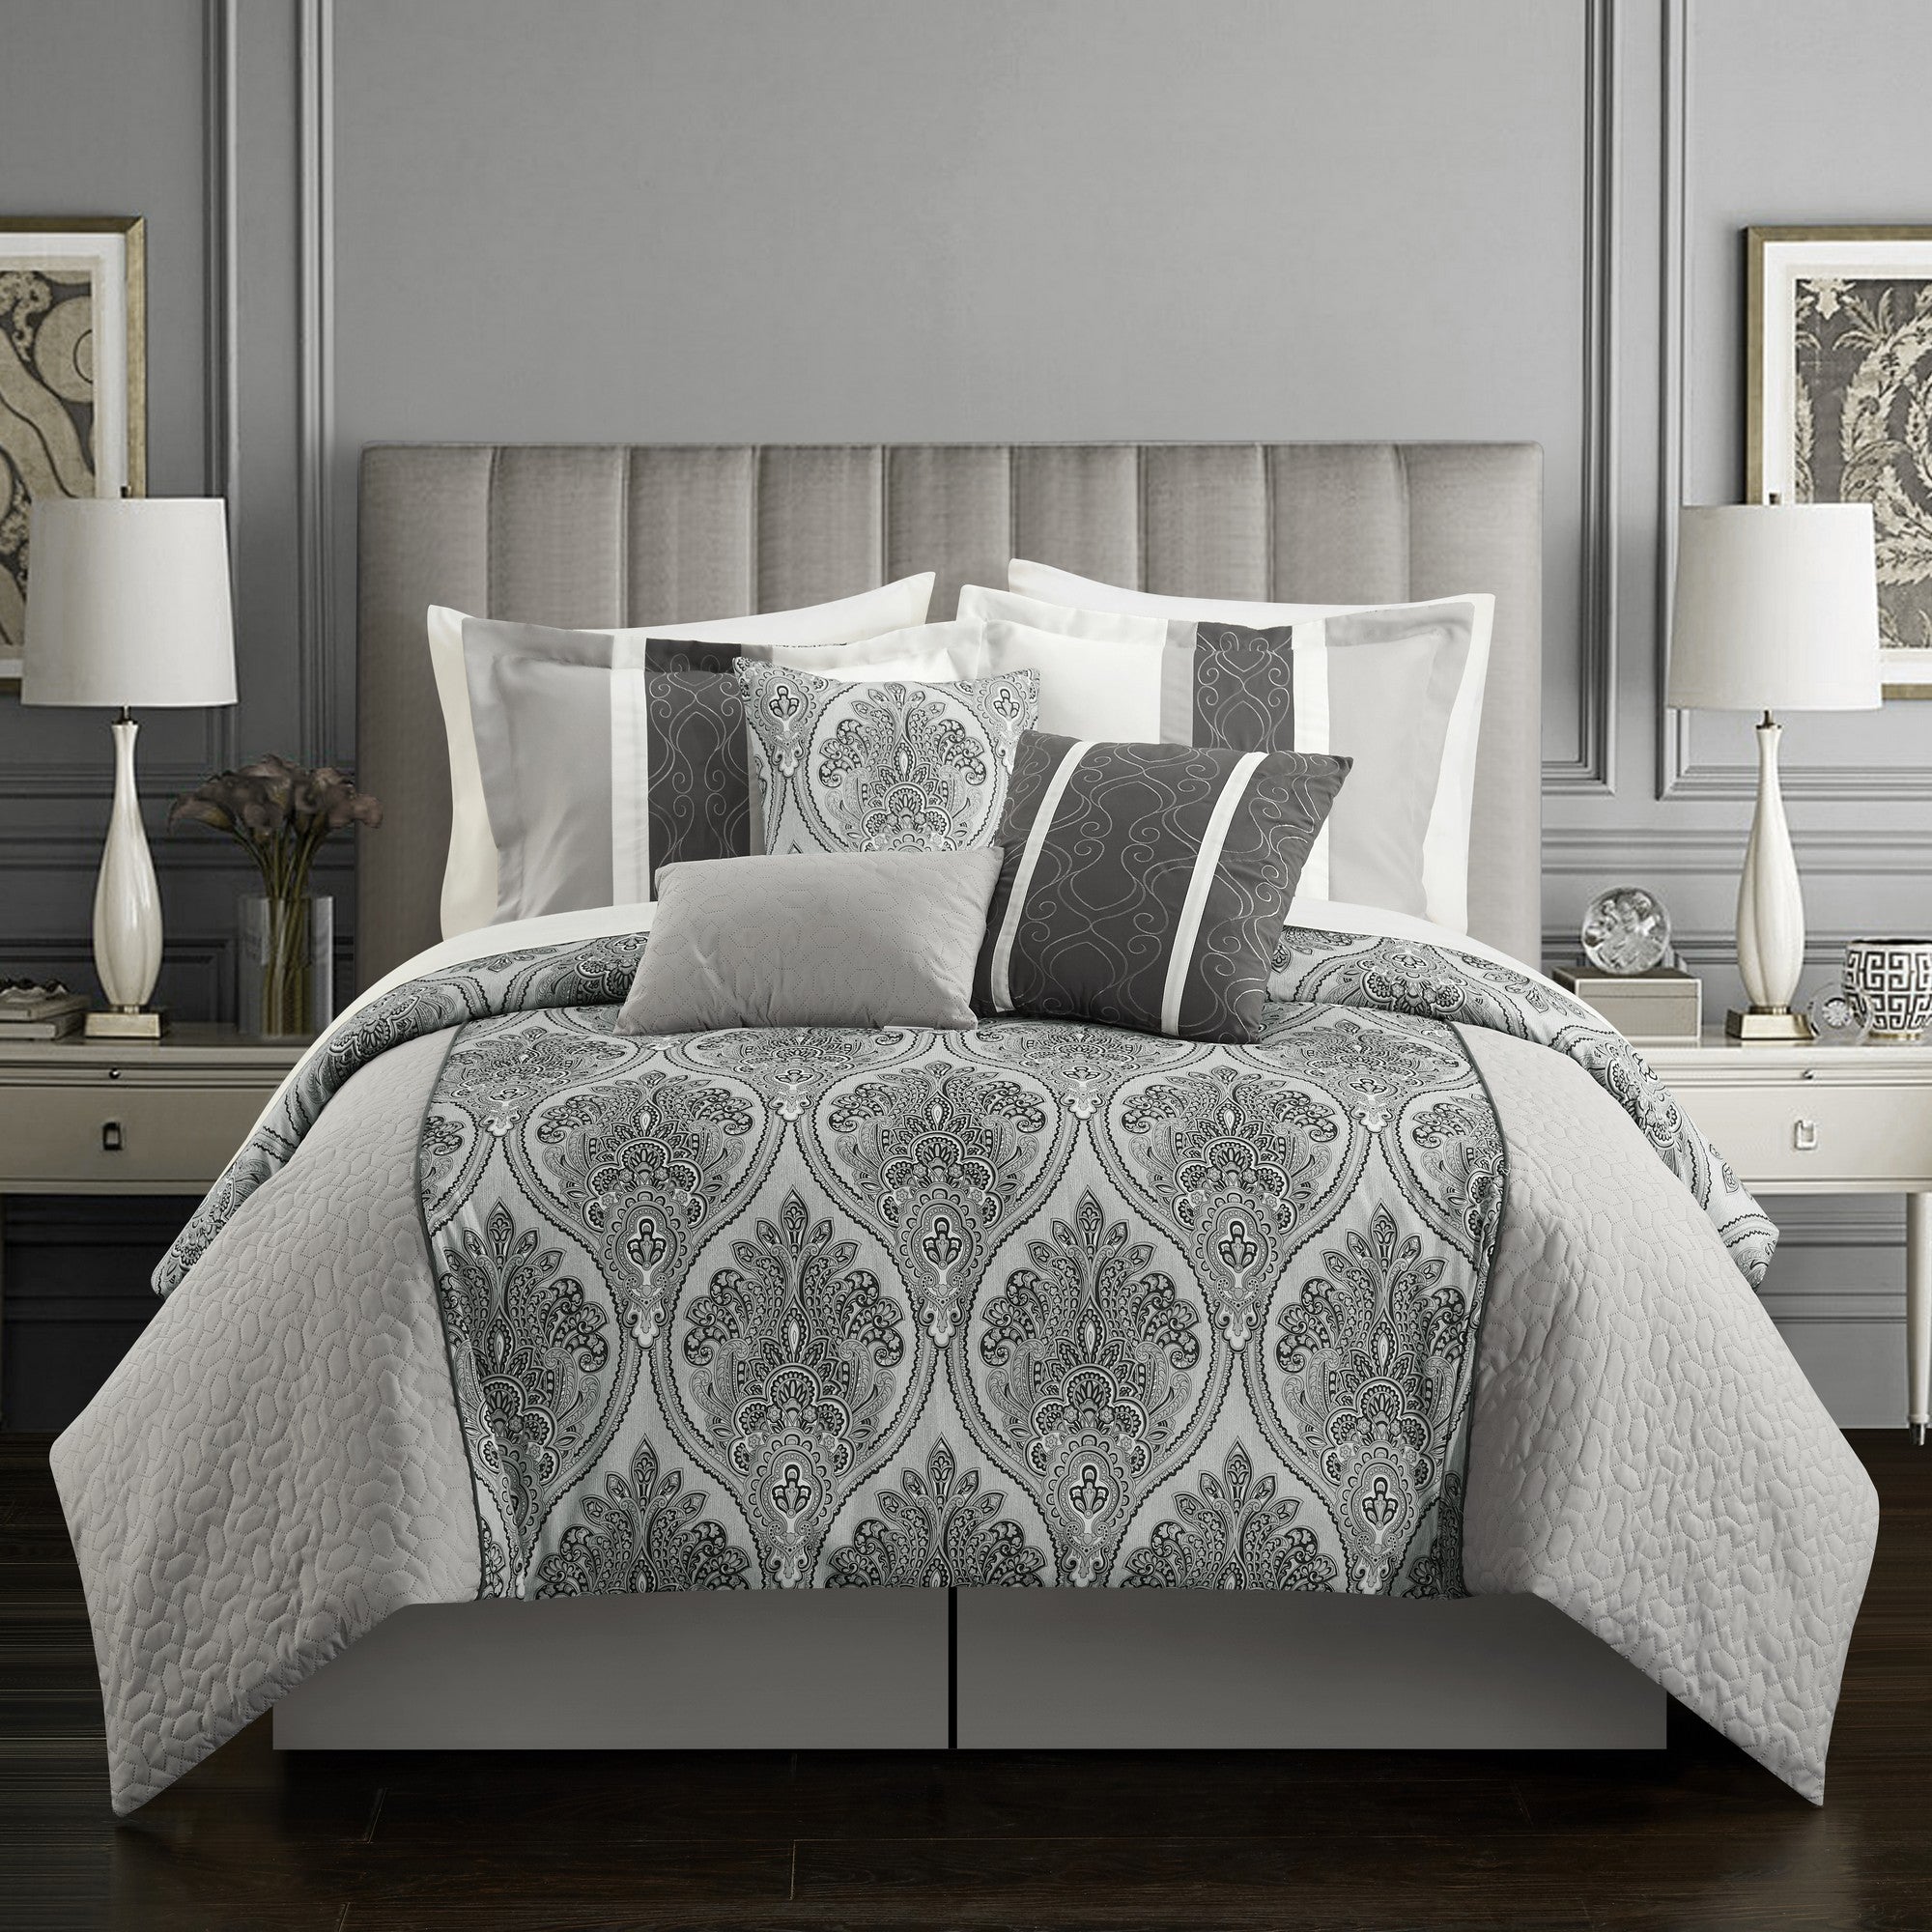 Chic Home Phantogram 11 Piece Comforter Set Reversible Two-Tone Damask Pattern Geometric Quilting Bed in a Bag - Sheets Pillowcases Bed Skirt Decorative Pillows Shams Included - Grey